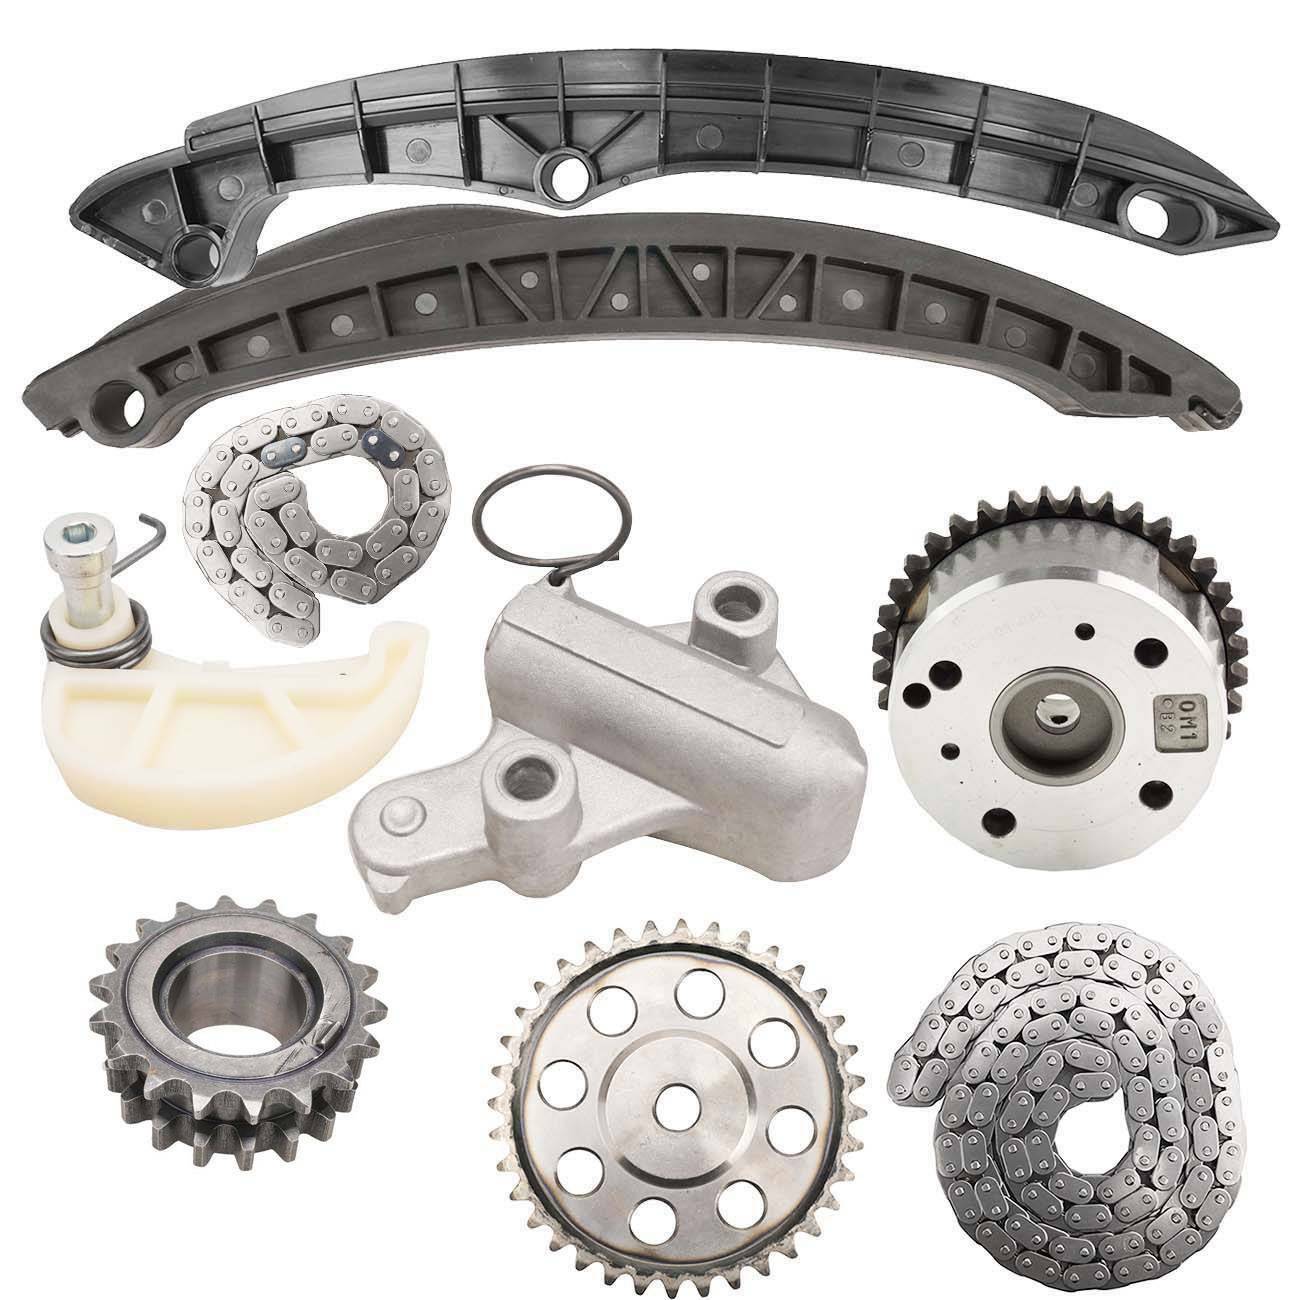 Timing Chain Guide Kit for AUDI A1 A3 Skoda Octavia VW Golf Jetta Polo German Made